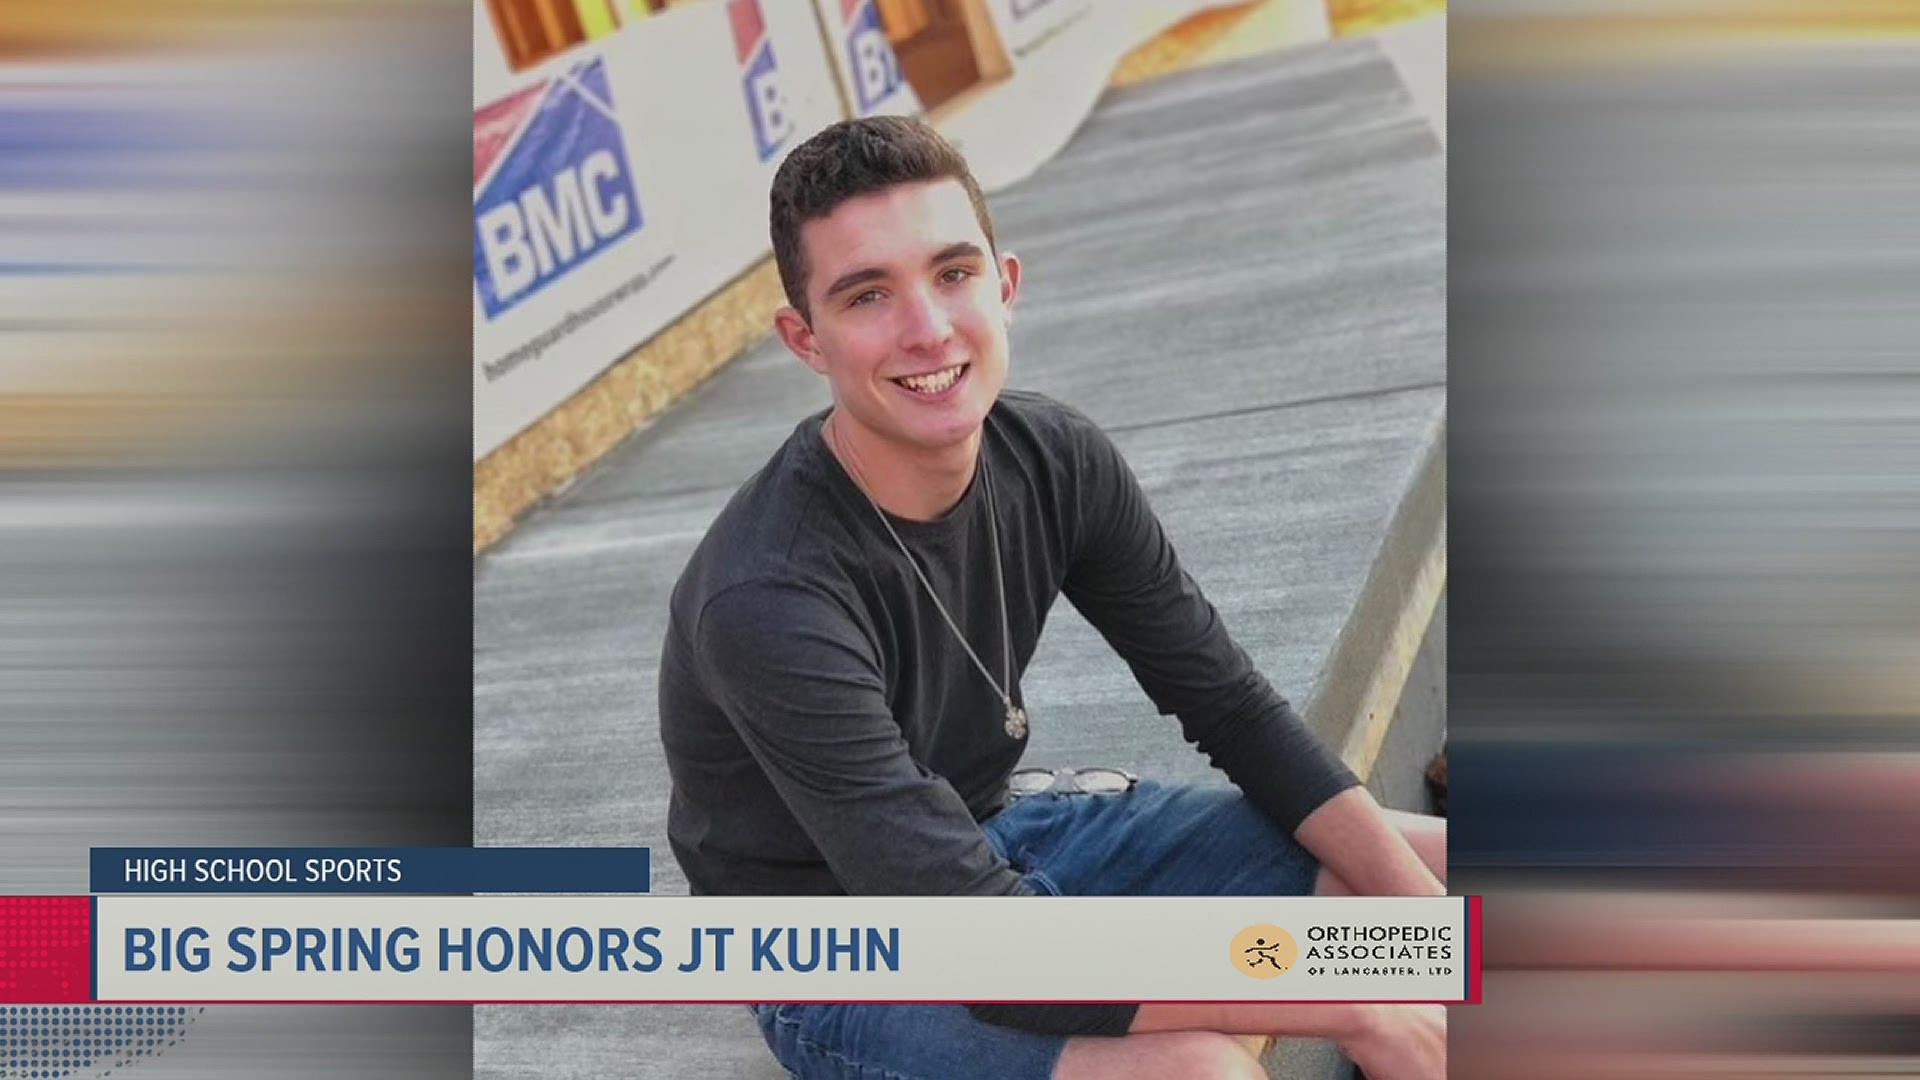 Kuhn was just 16-years-old when he passed away in March 2019.